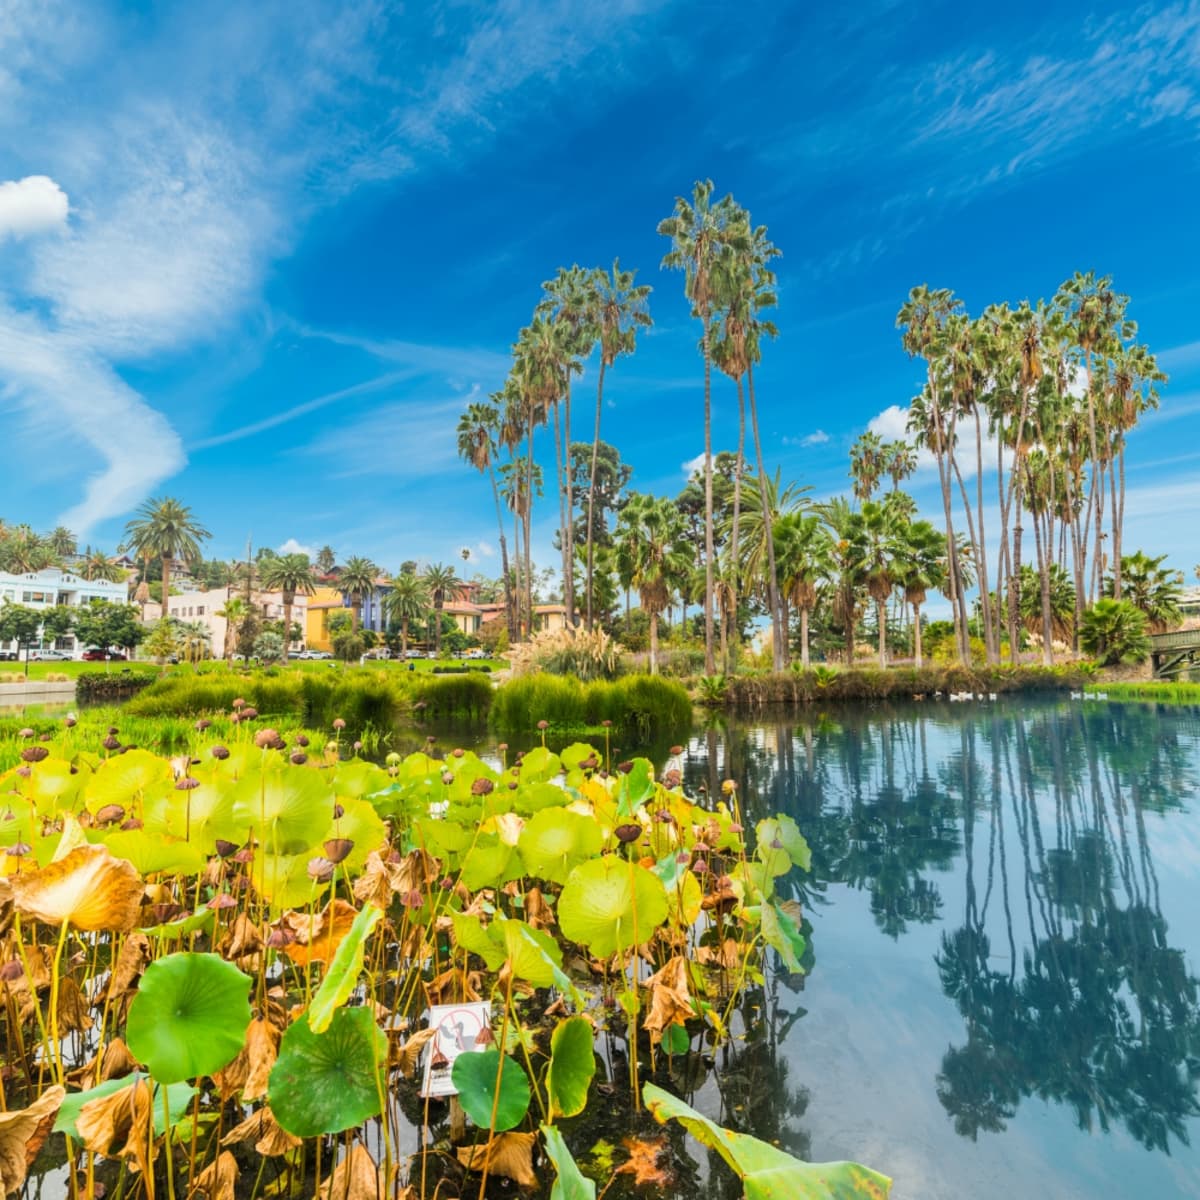 Echo Park Closed for Repairs? Sources Say the Park Will be Fenced - LAmag -  Culture, Food, Fashion, News & Los Angeles